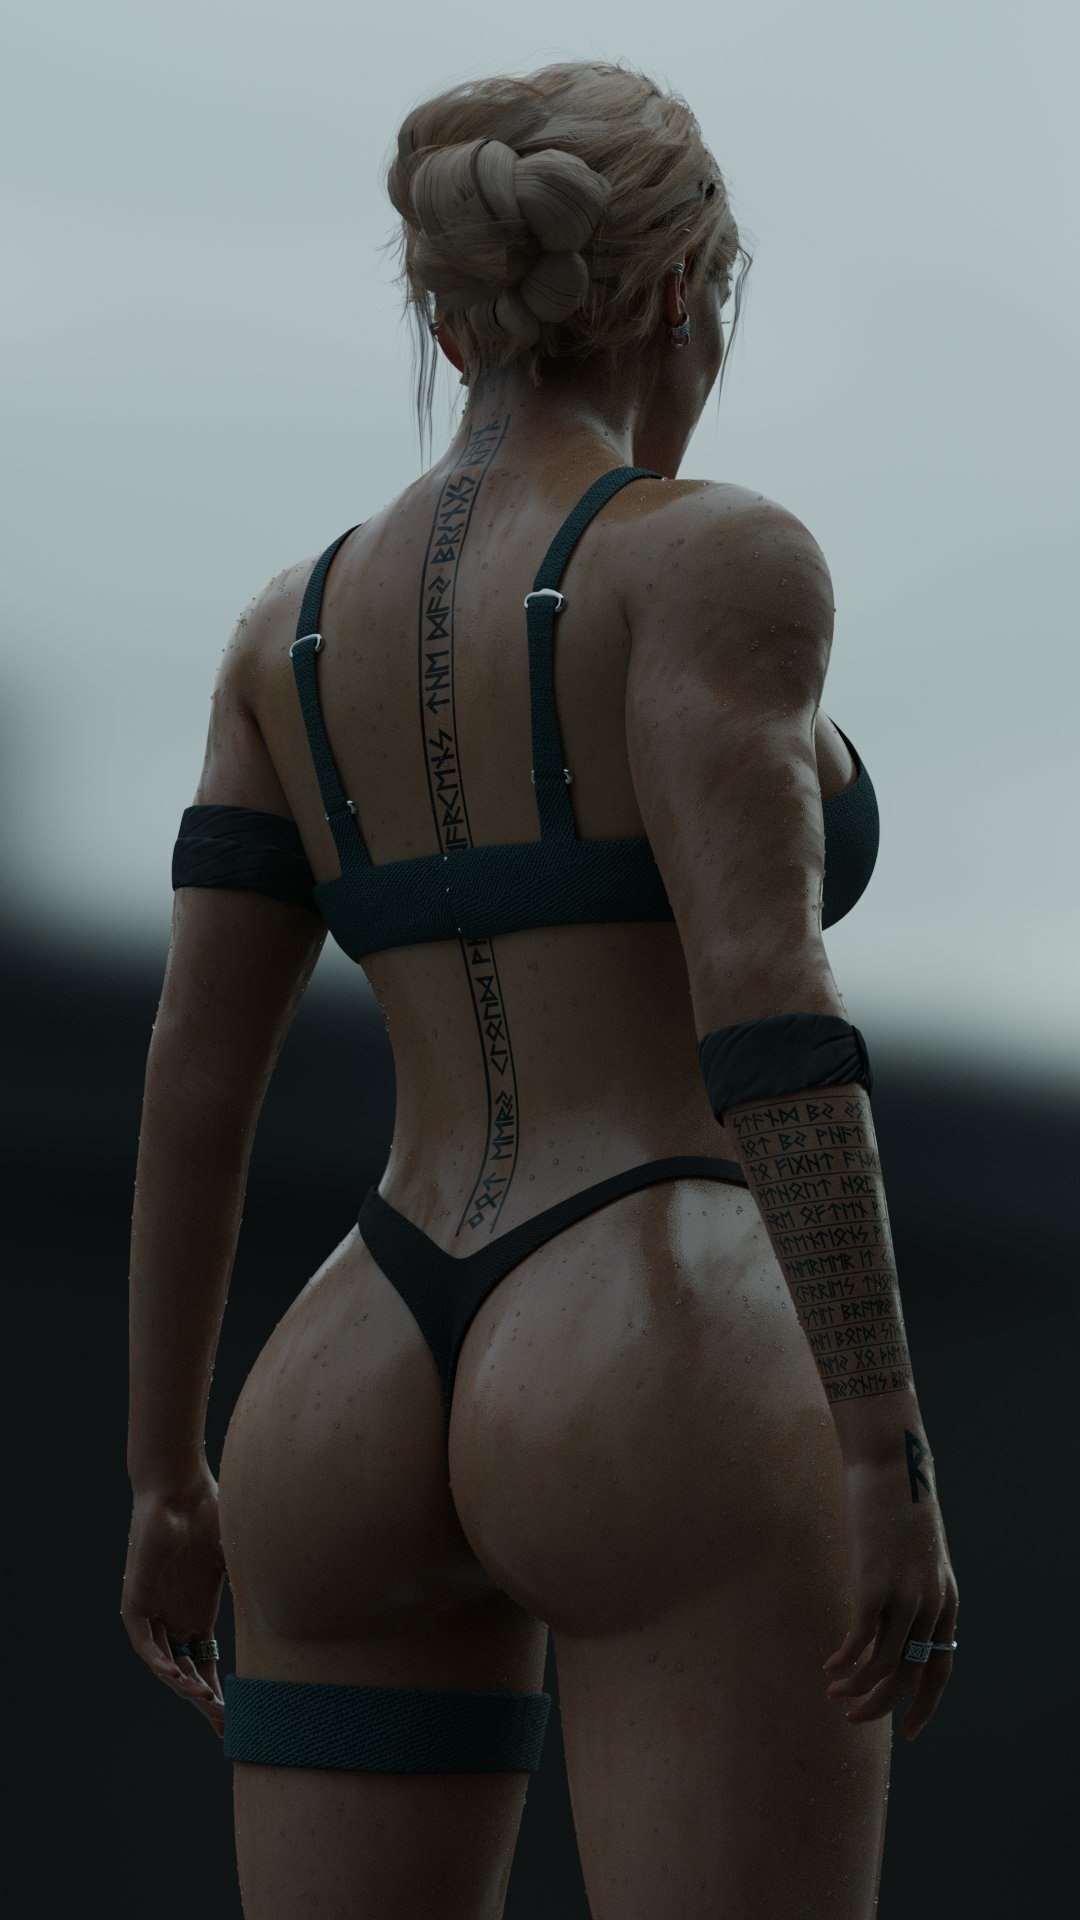 Always gotta check both front and back 🍑 Revna Original Original Character Blonde Sexy 3d Girl Big Booty Muscular Girl Perfect Body 2